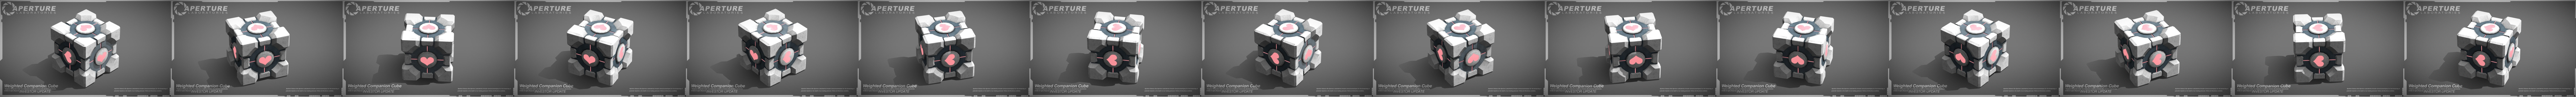 Weighted Companion Cube (Portal) - 3D model by Angel Cormier  (@angelcormier) [875ad1b]